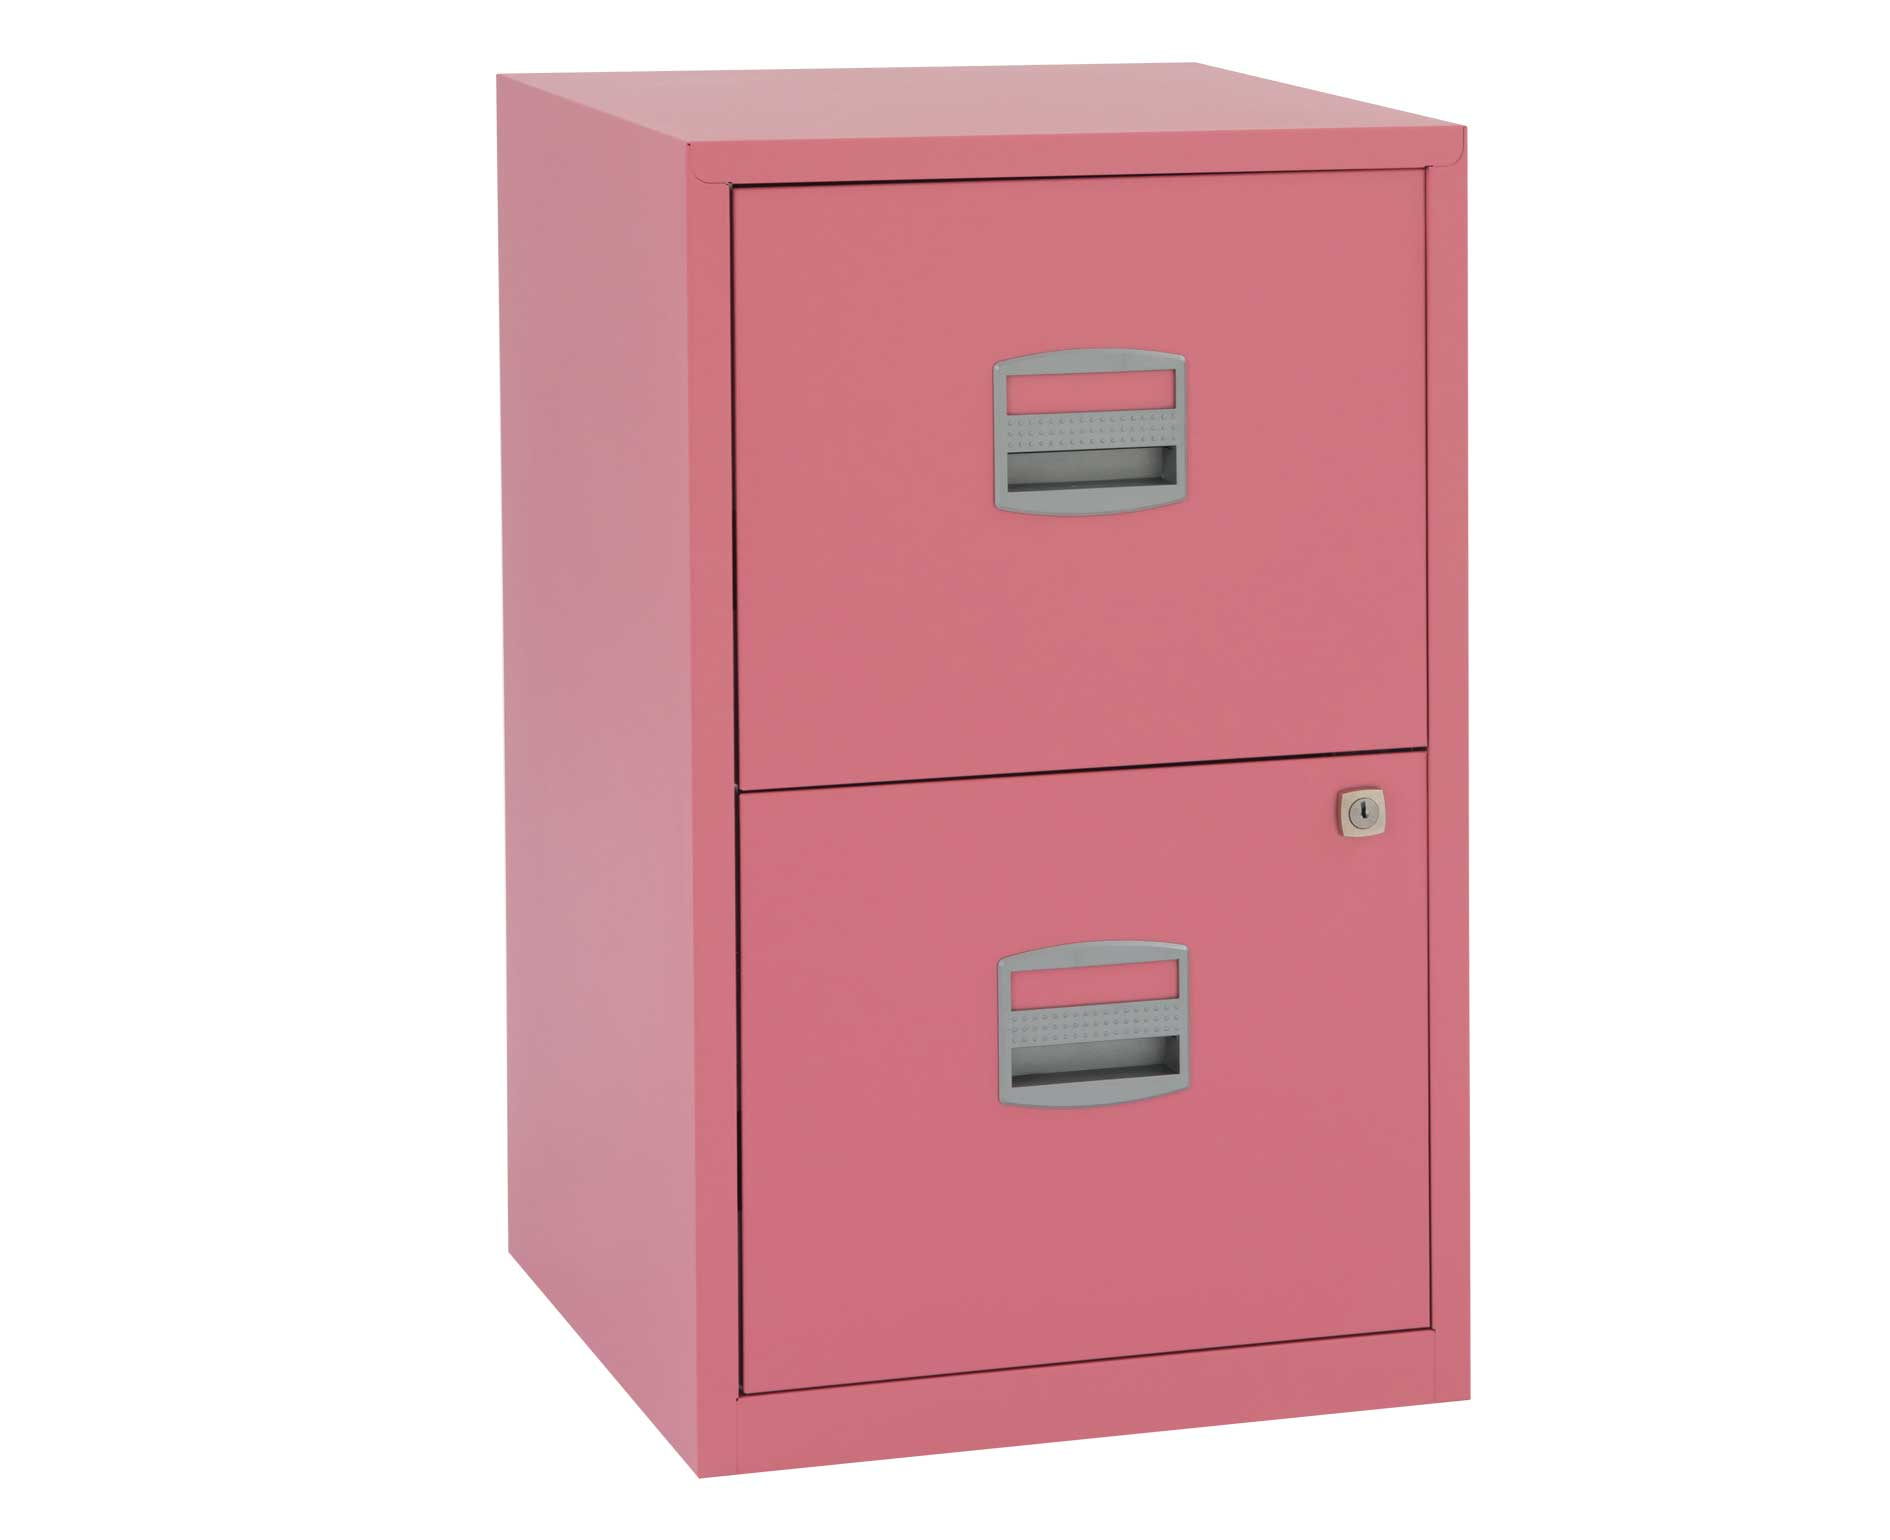 Pink Filing Cabinets Storage Shelving Furniture Storage Ryman intended for dimensions 1890 X 1540